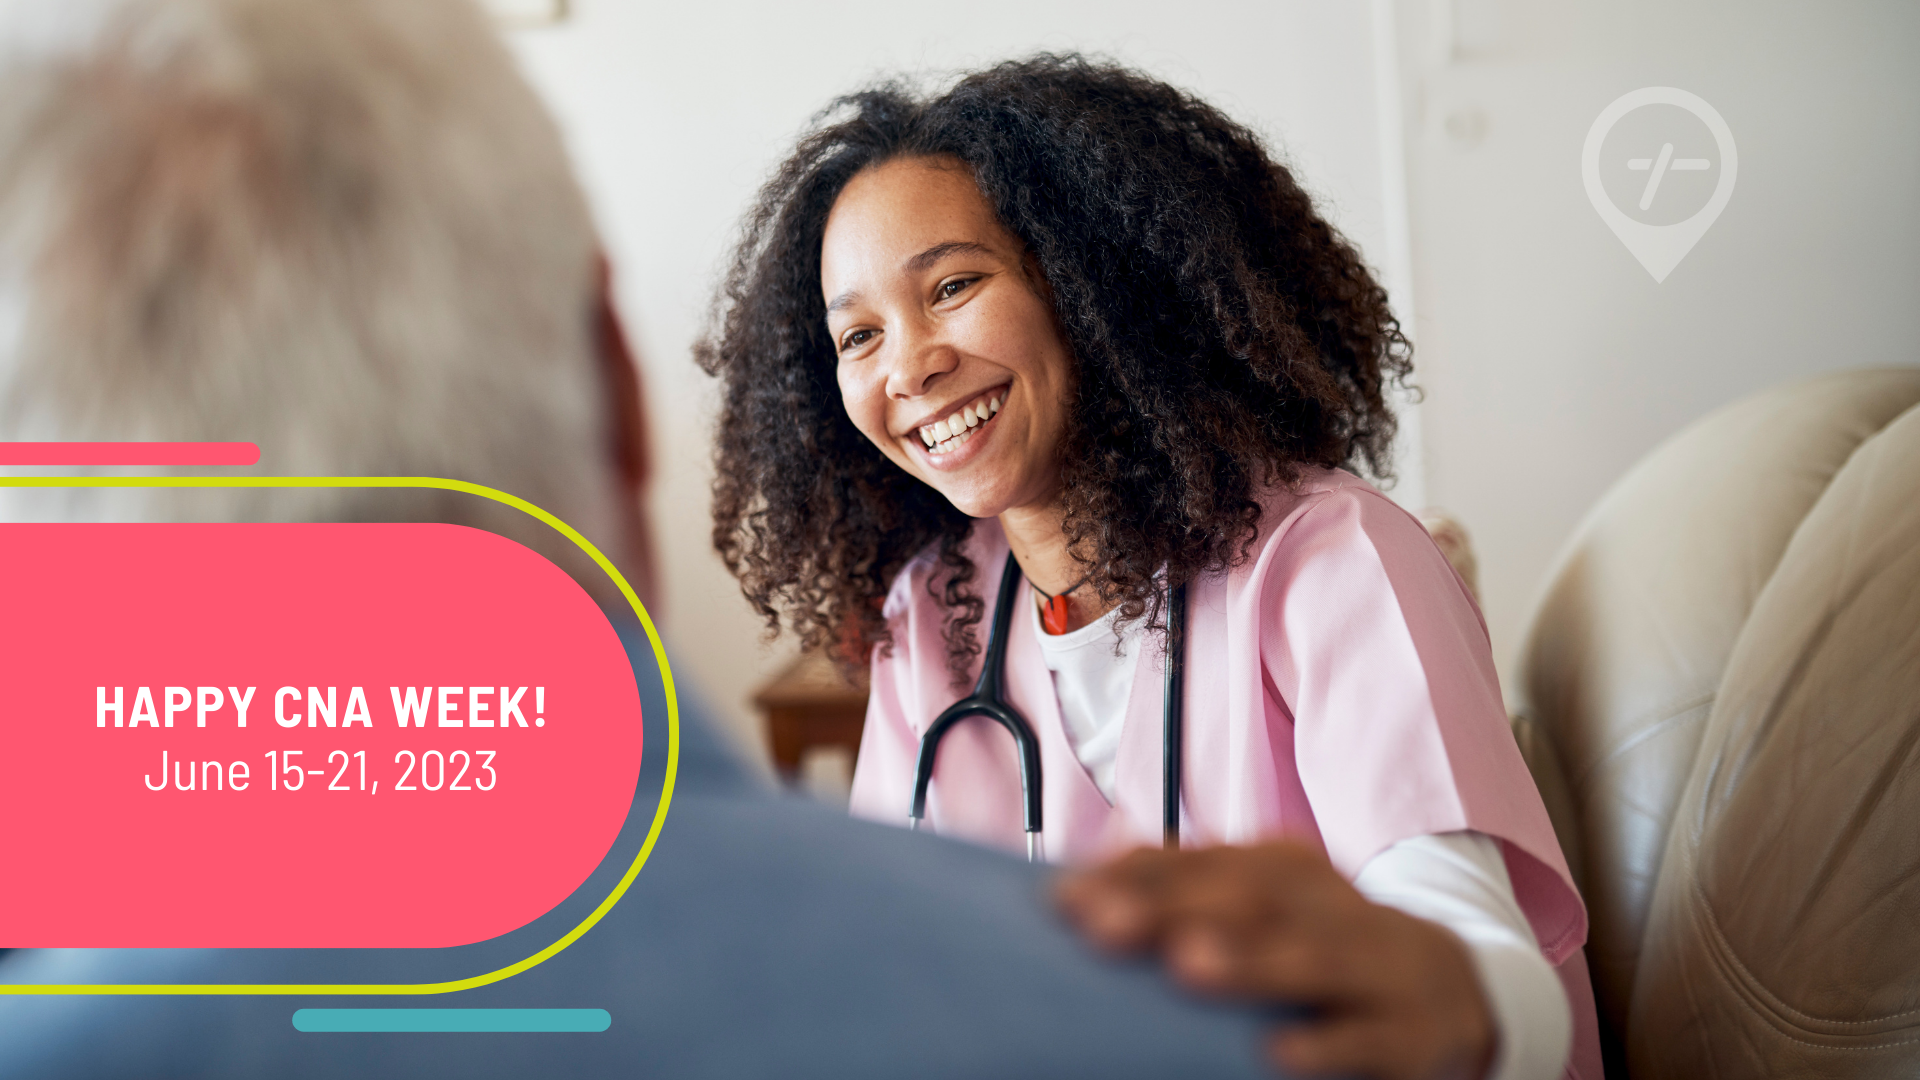 Happy CNA Week! As the National Association of Health Care Assistants celebrates the unstoppable nature of certified nursing assistants, we want to send some love to our hard-working CNAs who are out there crushing it every day.